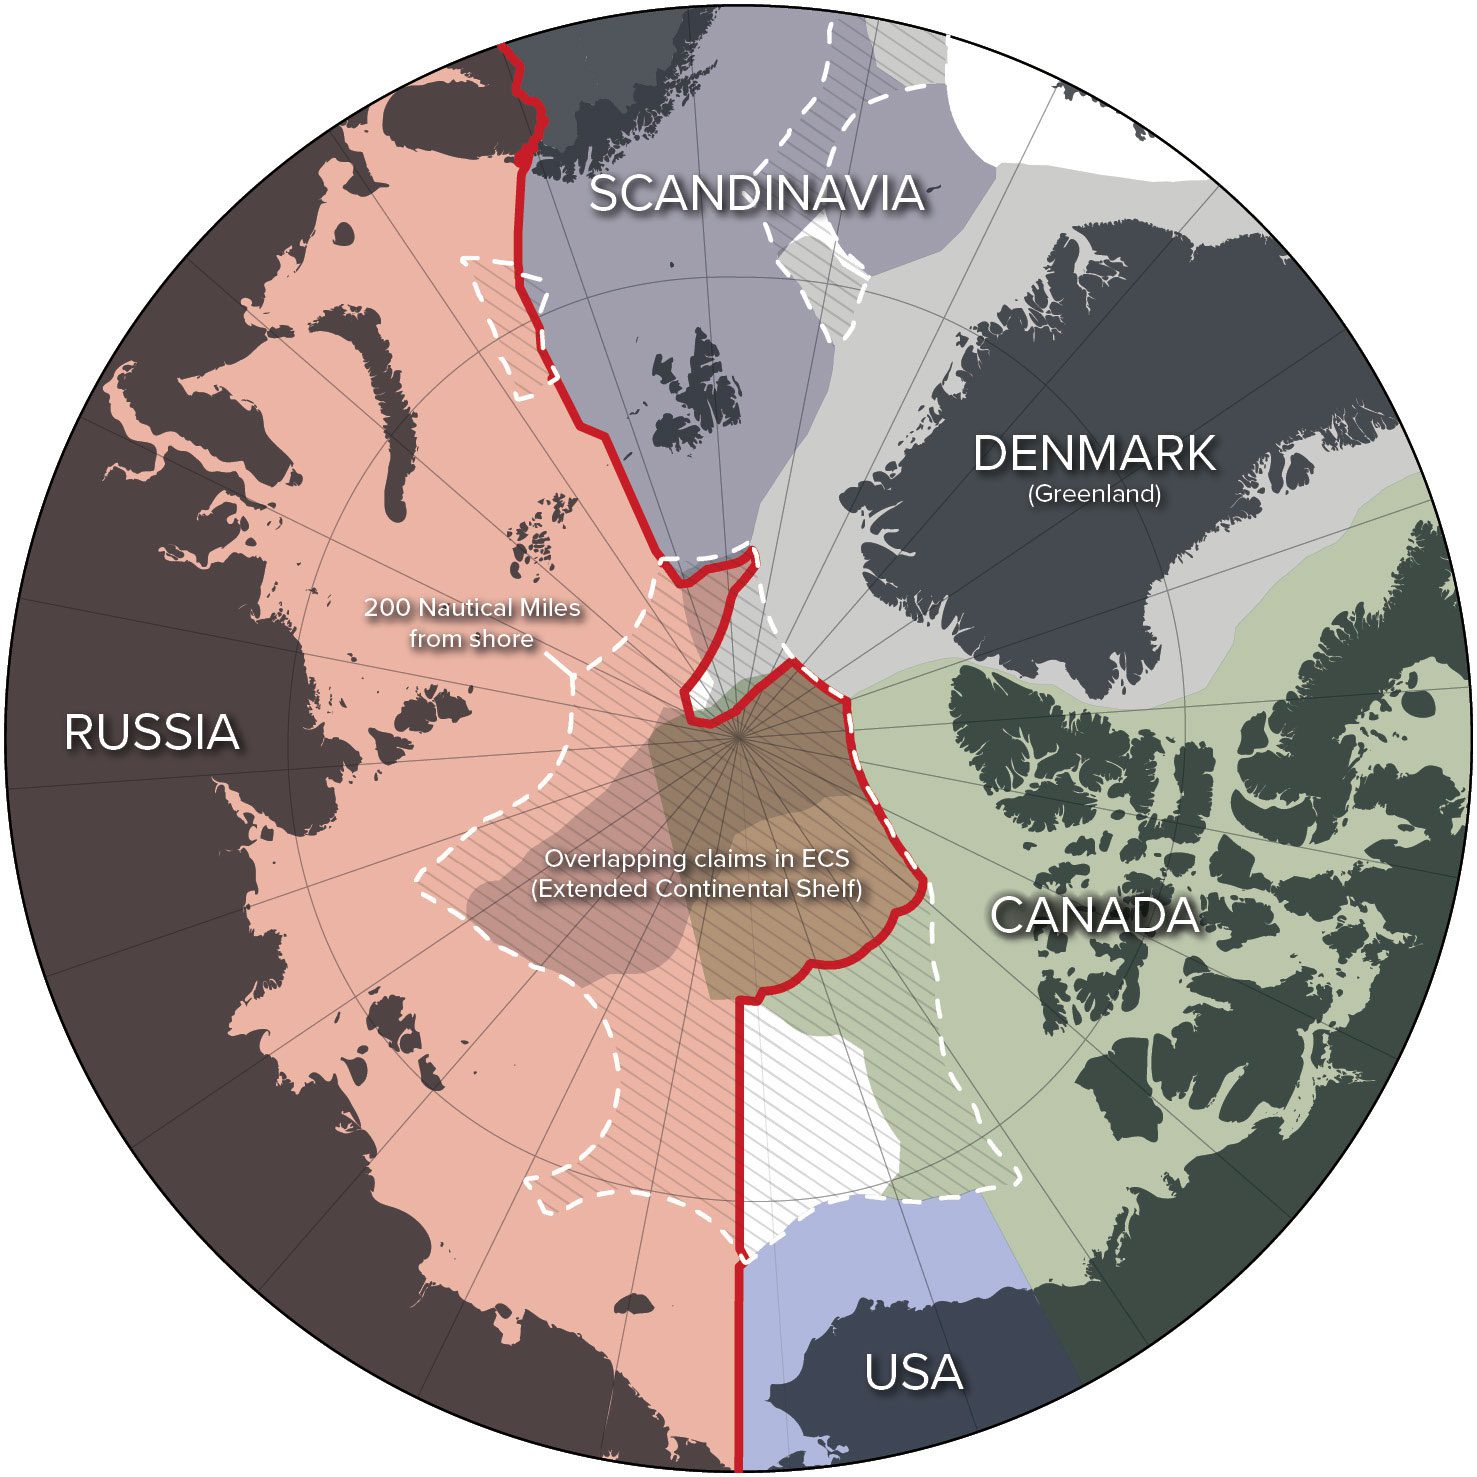 Multiple countries control territories within the Arctic circle, with Russia alone accounting for 53% of the Arctic coastline.